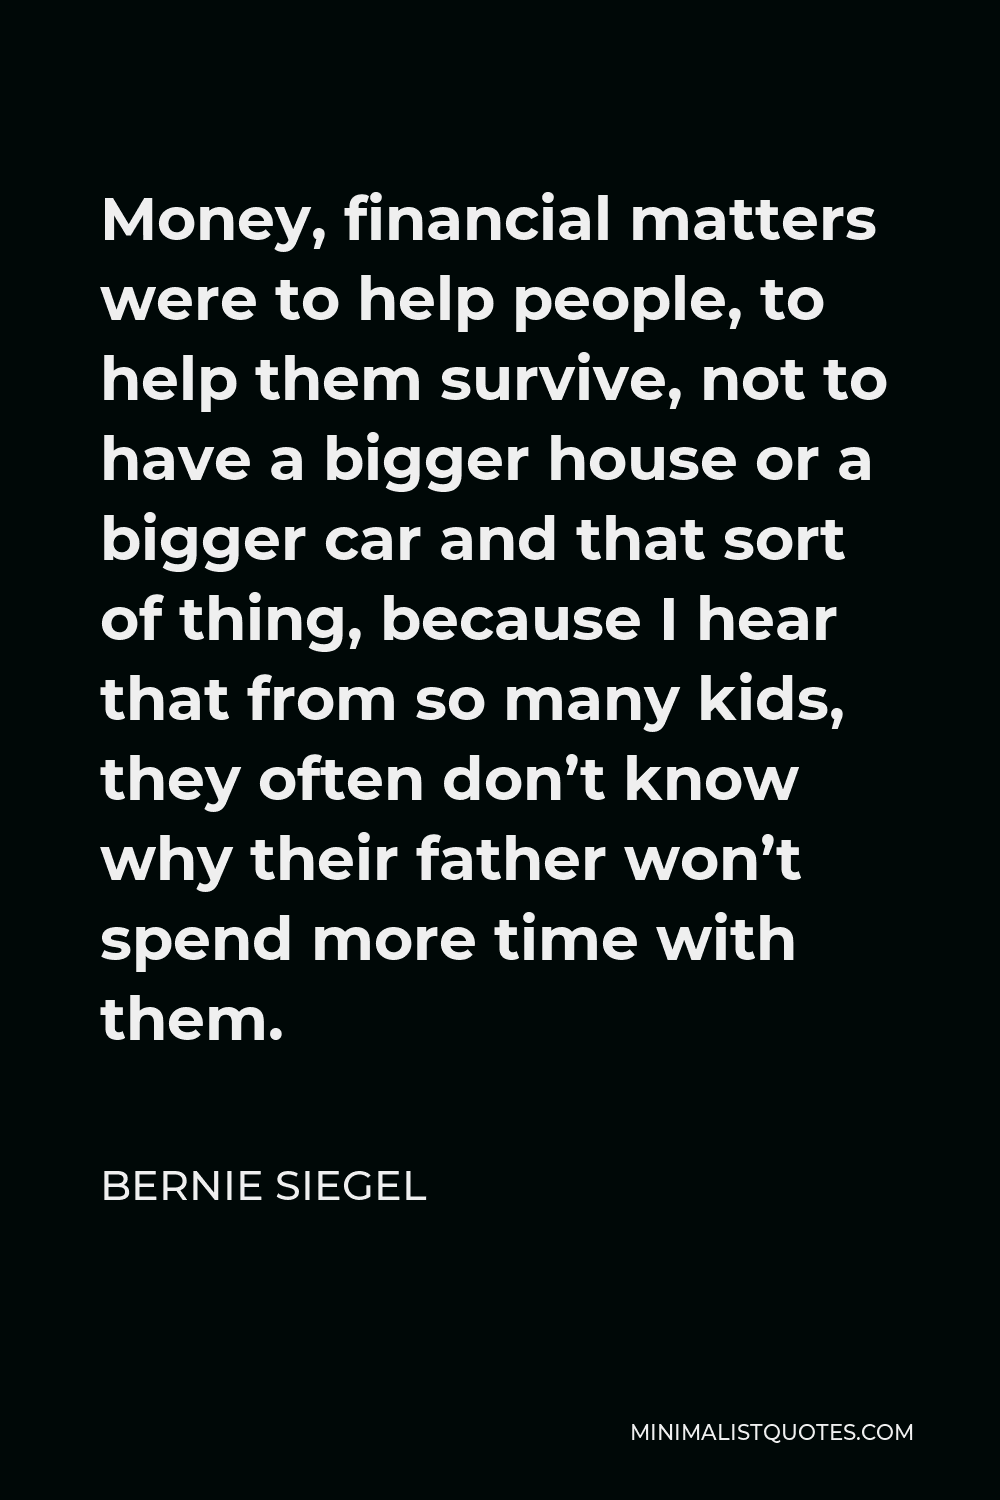 Bernie Siegel Quote - Money, financial matters were to help people, to help them survive, not to have a bigger house or a bigger car and that sort of thing, because I hear that from so many kids, they often don’t know why their father won’t spend more time with them.